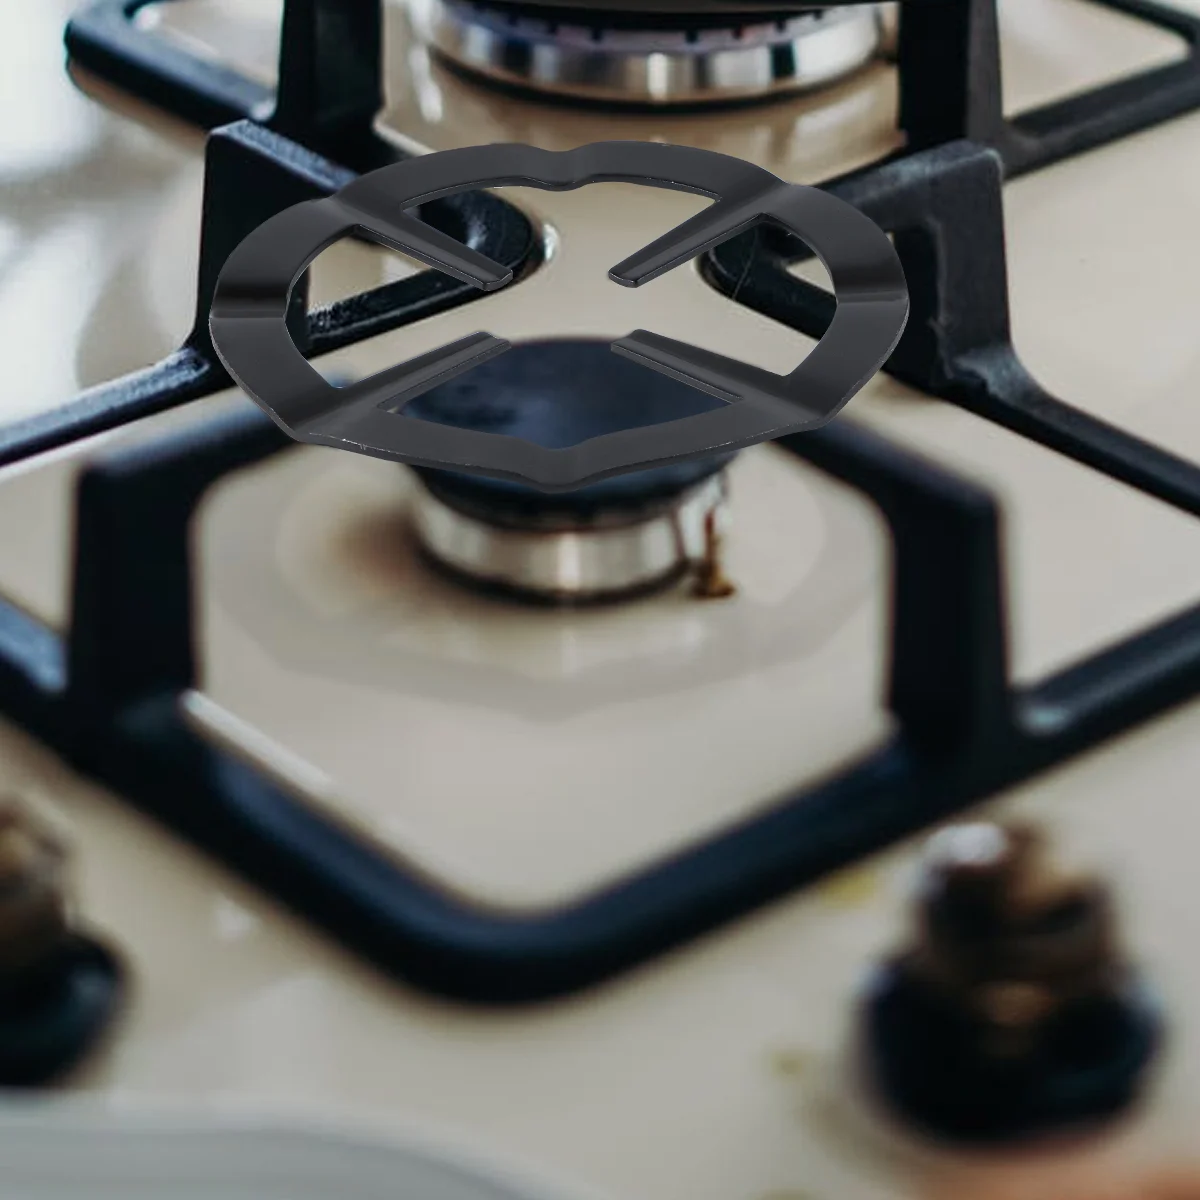 

Stove Gas Ring Pot Reducer Trivet Grates Coffee Rings Stand Trivets Burner Range Grate Rack Wok Iron Cast Cooktop Rgas Electric